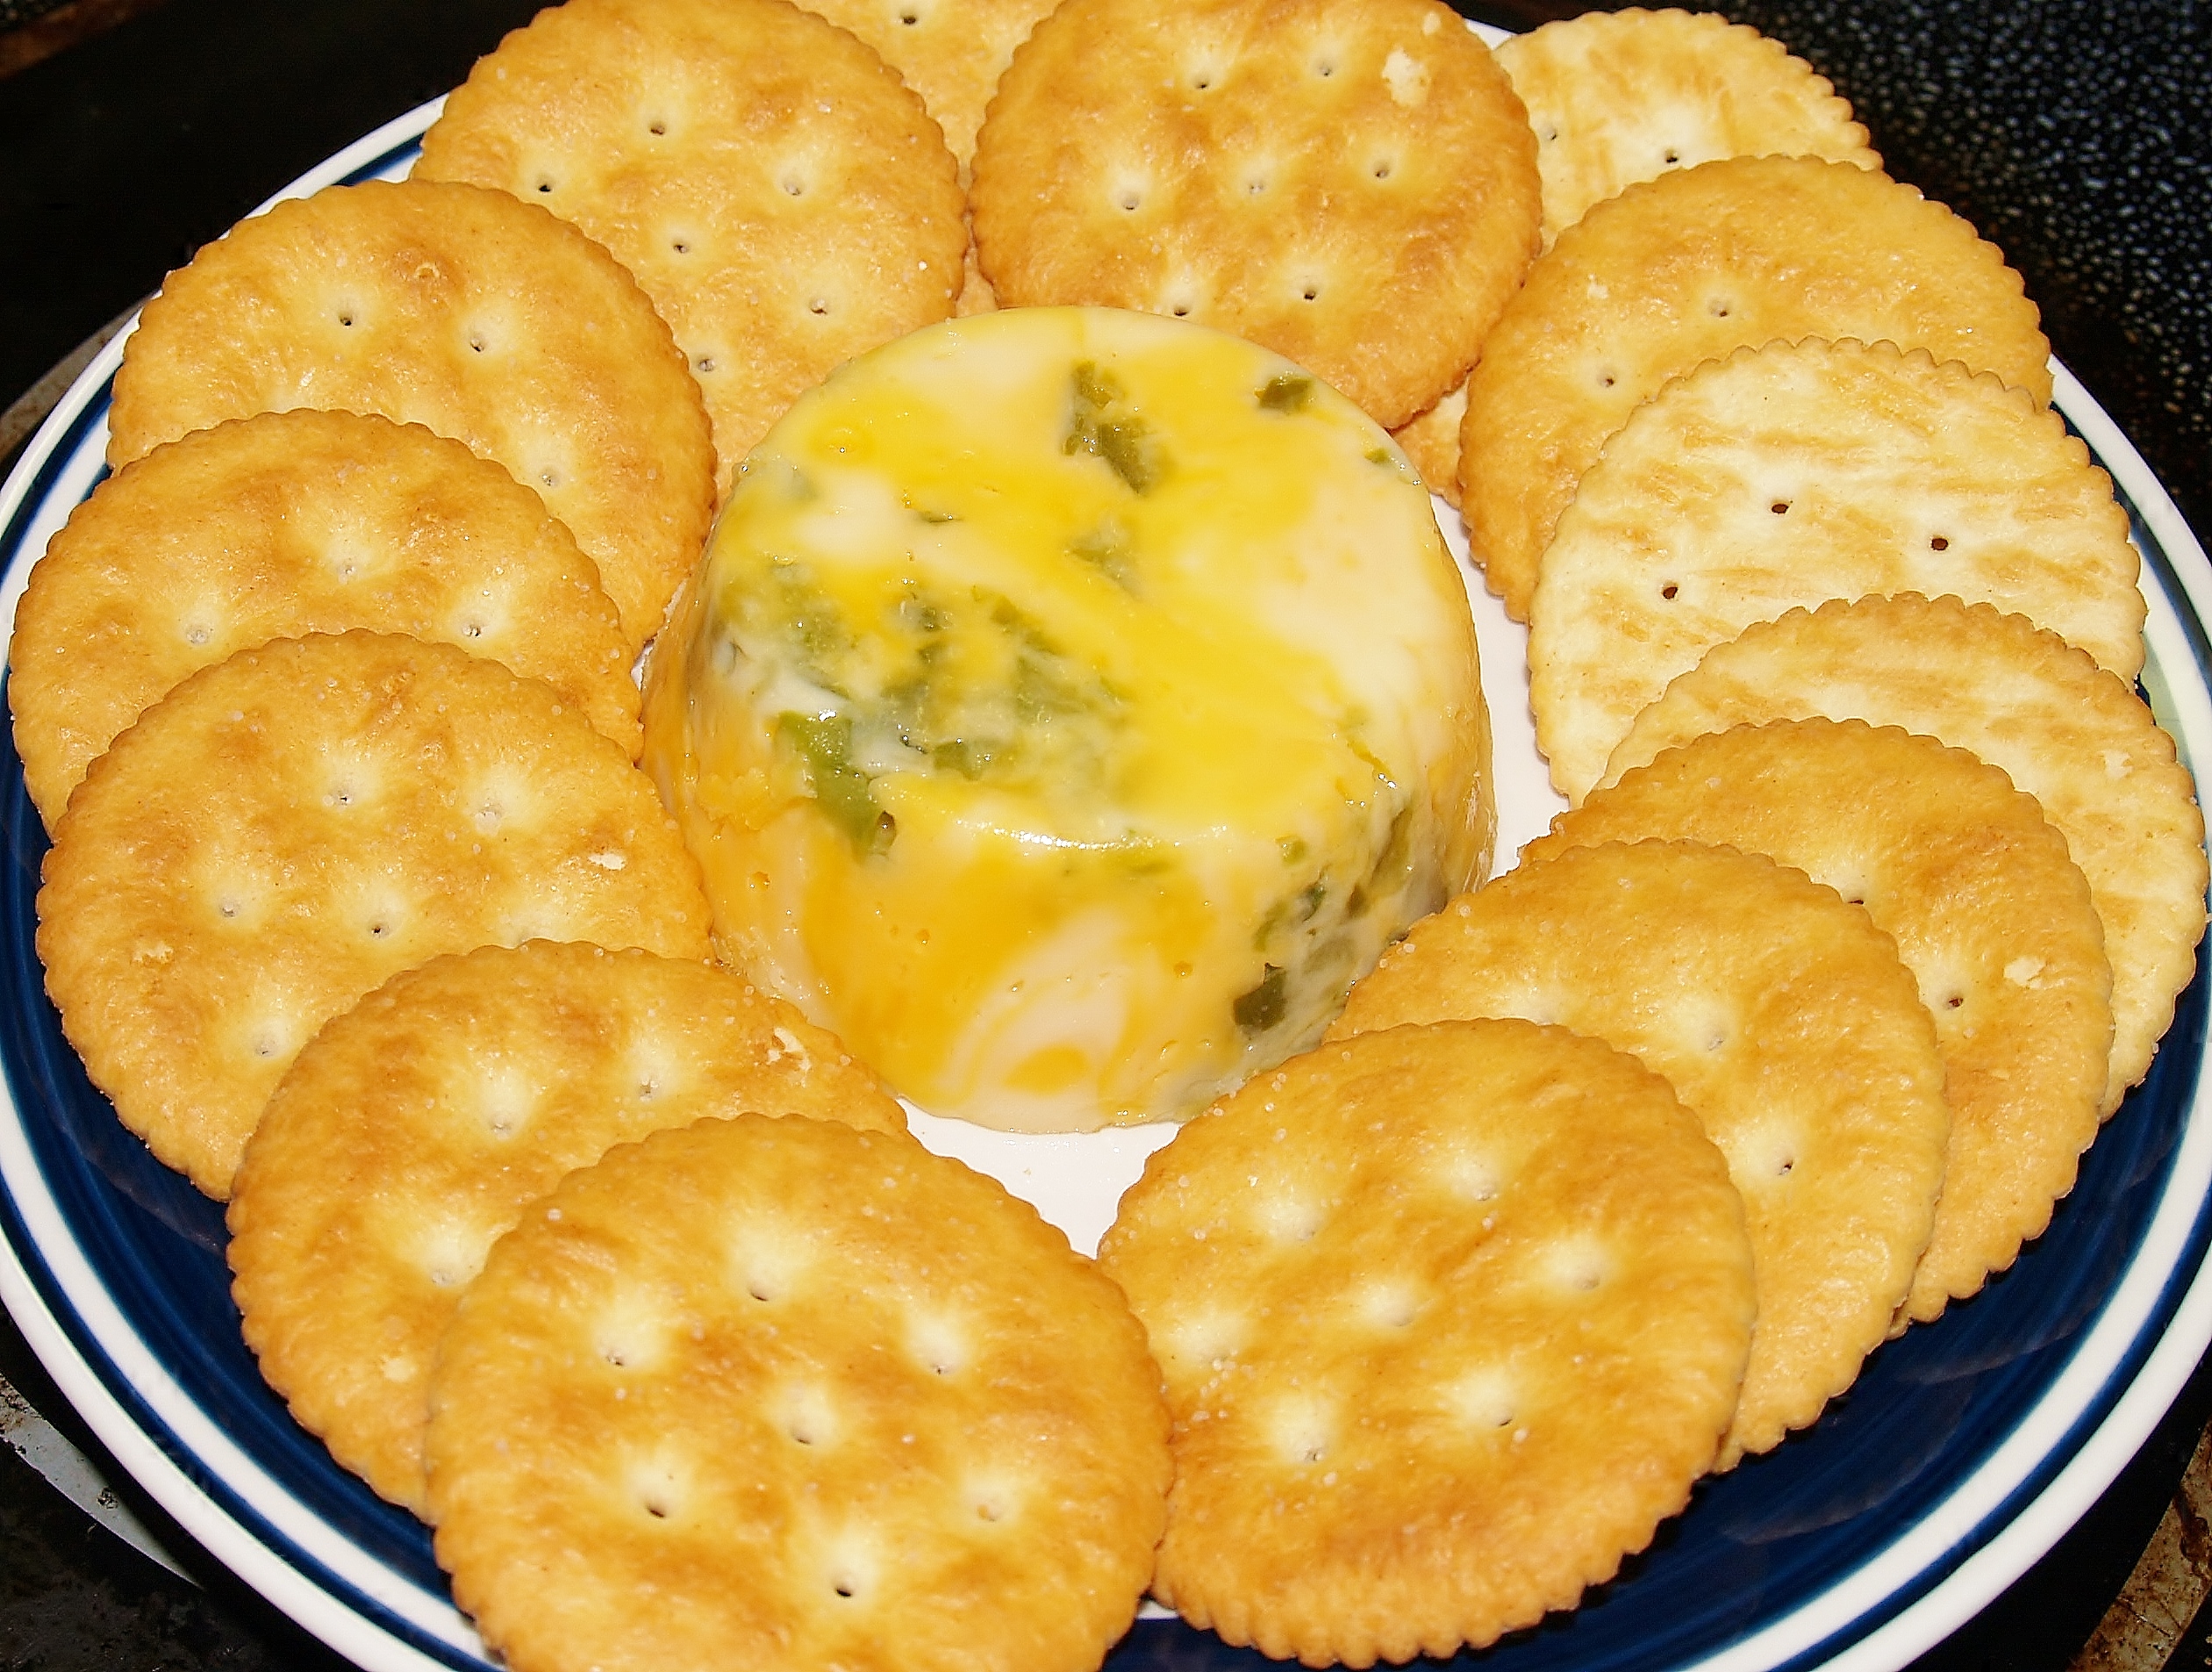 Smoke Your Own Cheese with a little work and some jalapenos or maybe onions or even some herbs you can have your own smoked appetizer quick!